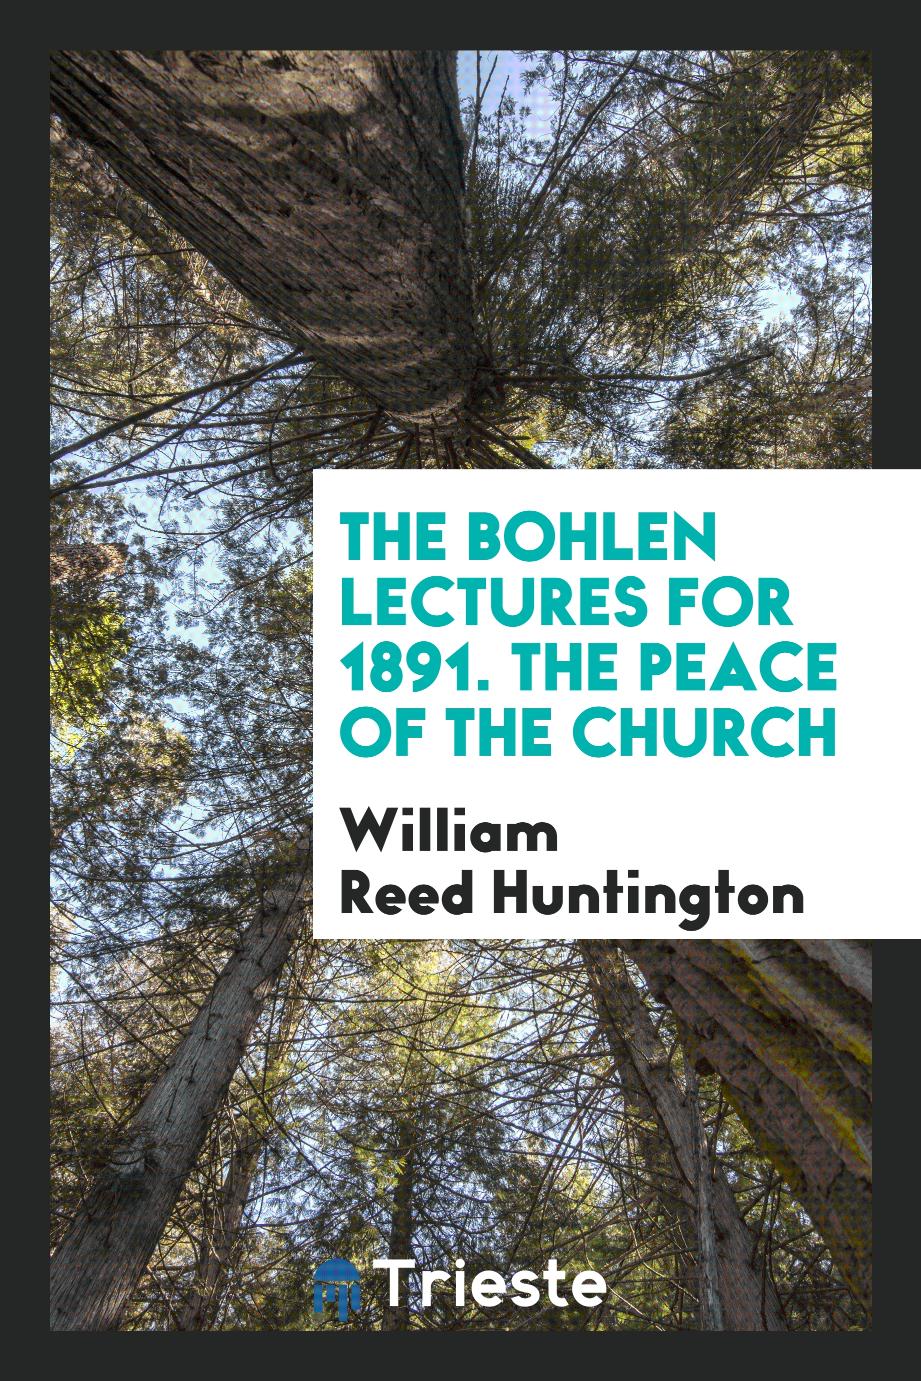 The Bohlen Lectures for 1891. The peace of the church